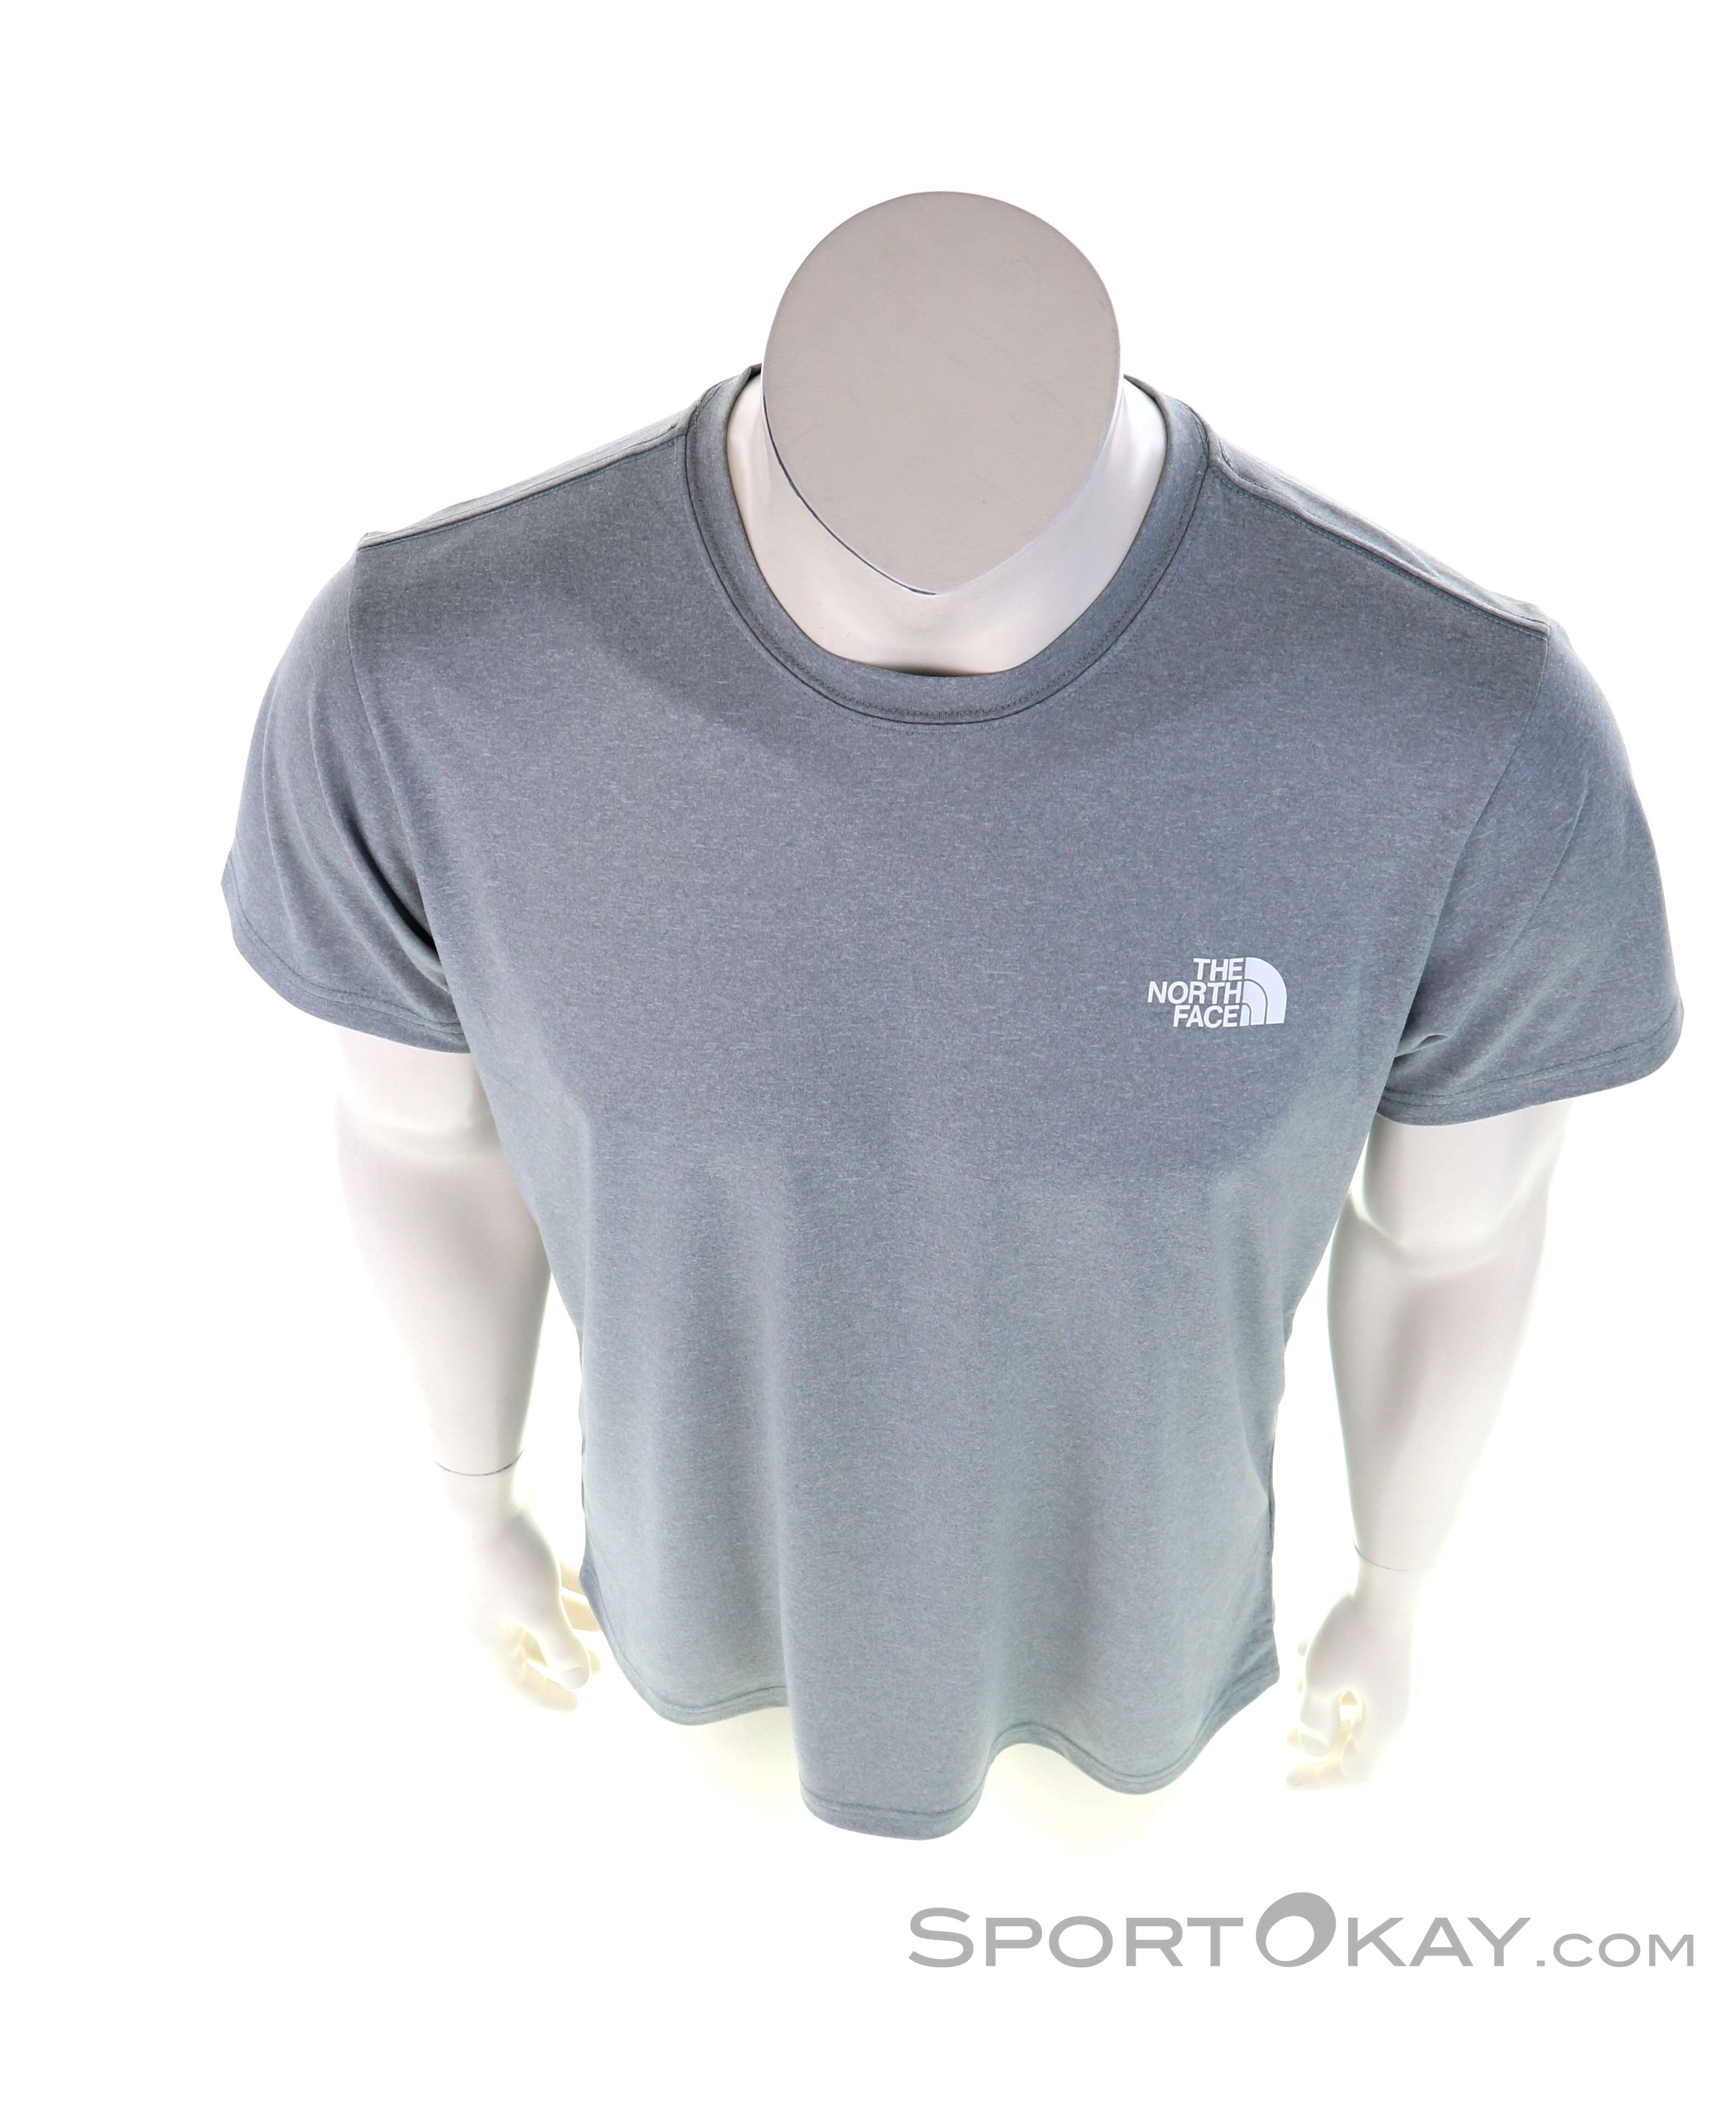 Tee All North - Face T-Shirts - Mens Clothing Box The Reaxion T-Shirt - - Shirts & Fitness Fitness